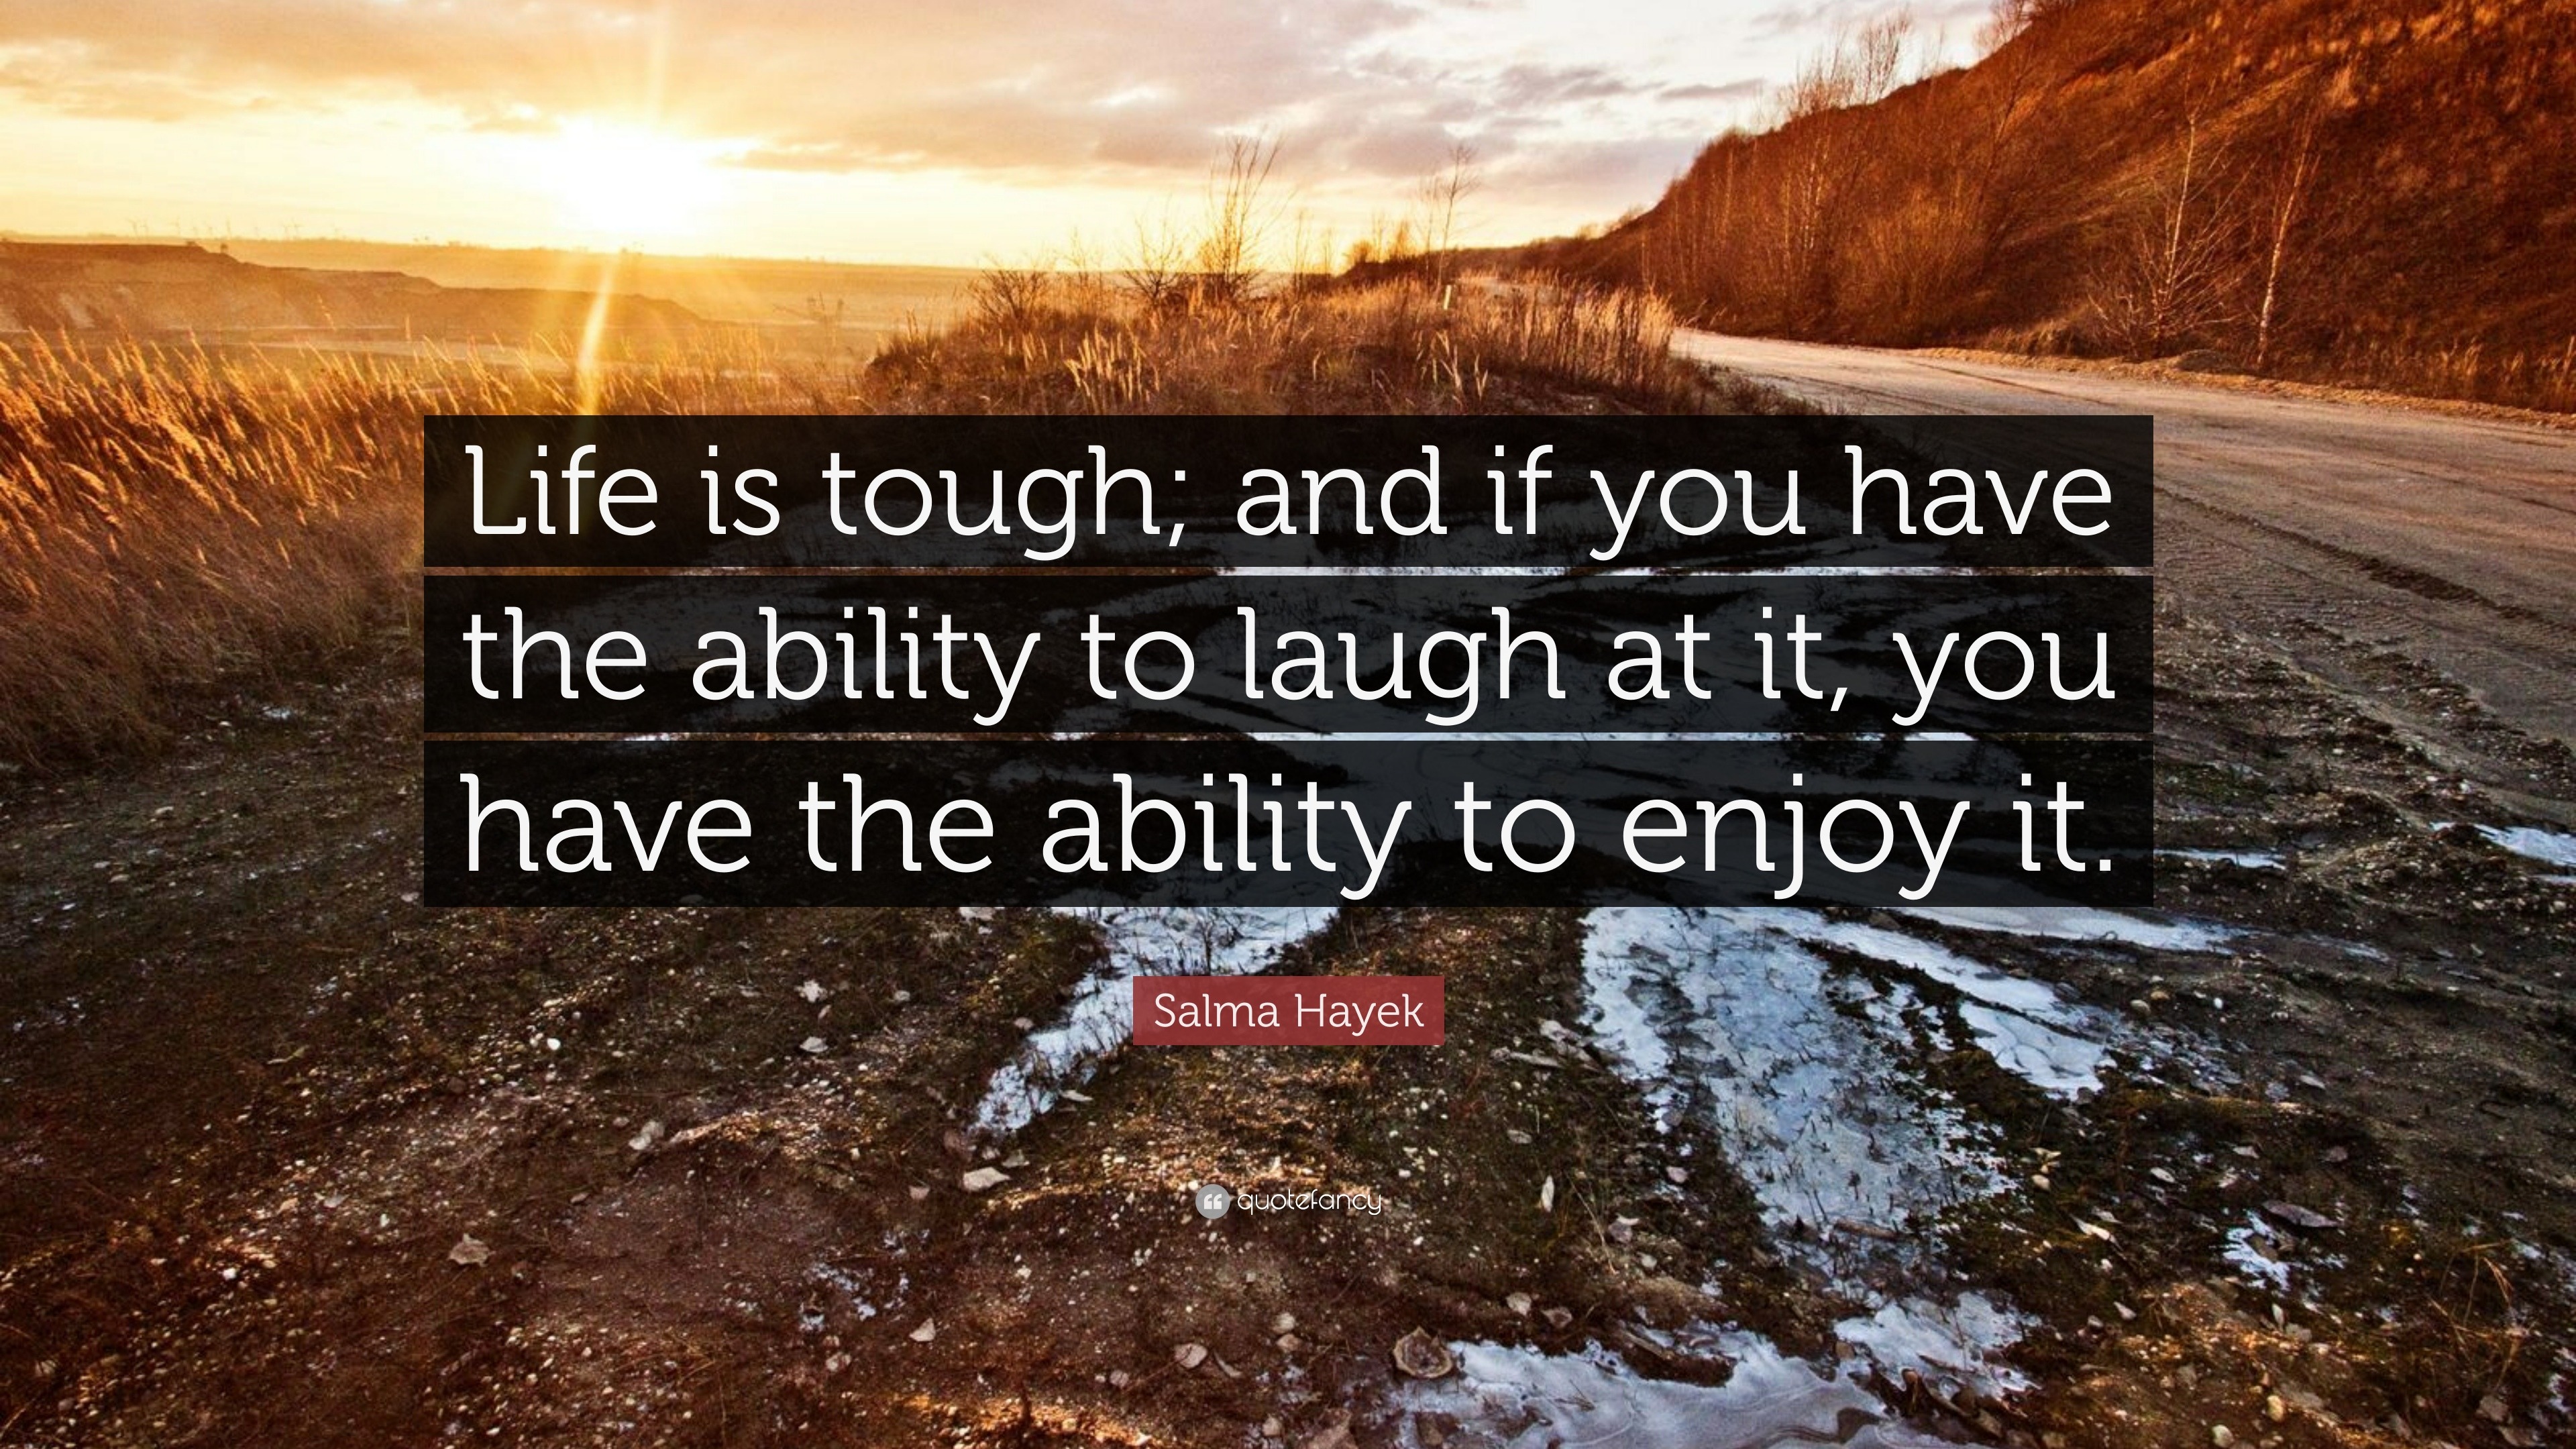 Salma Hayek Quote: “Life is tough; and if you have the ability to laugh ...